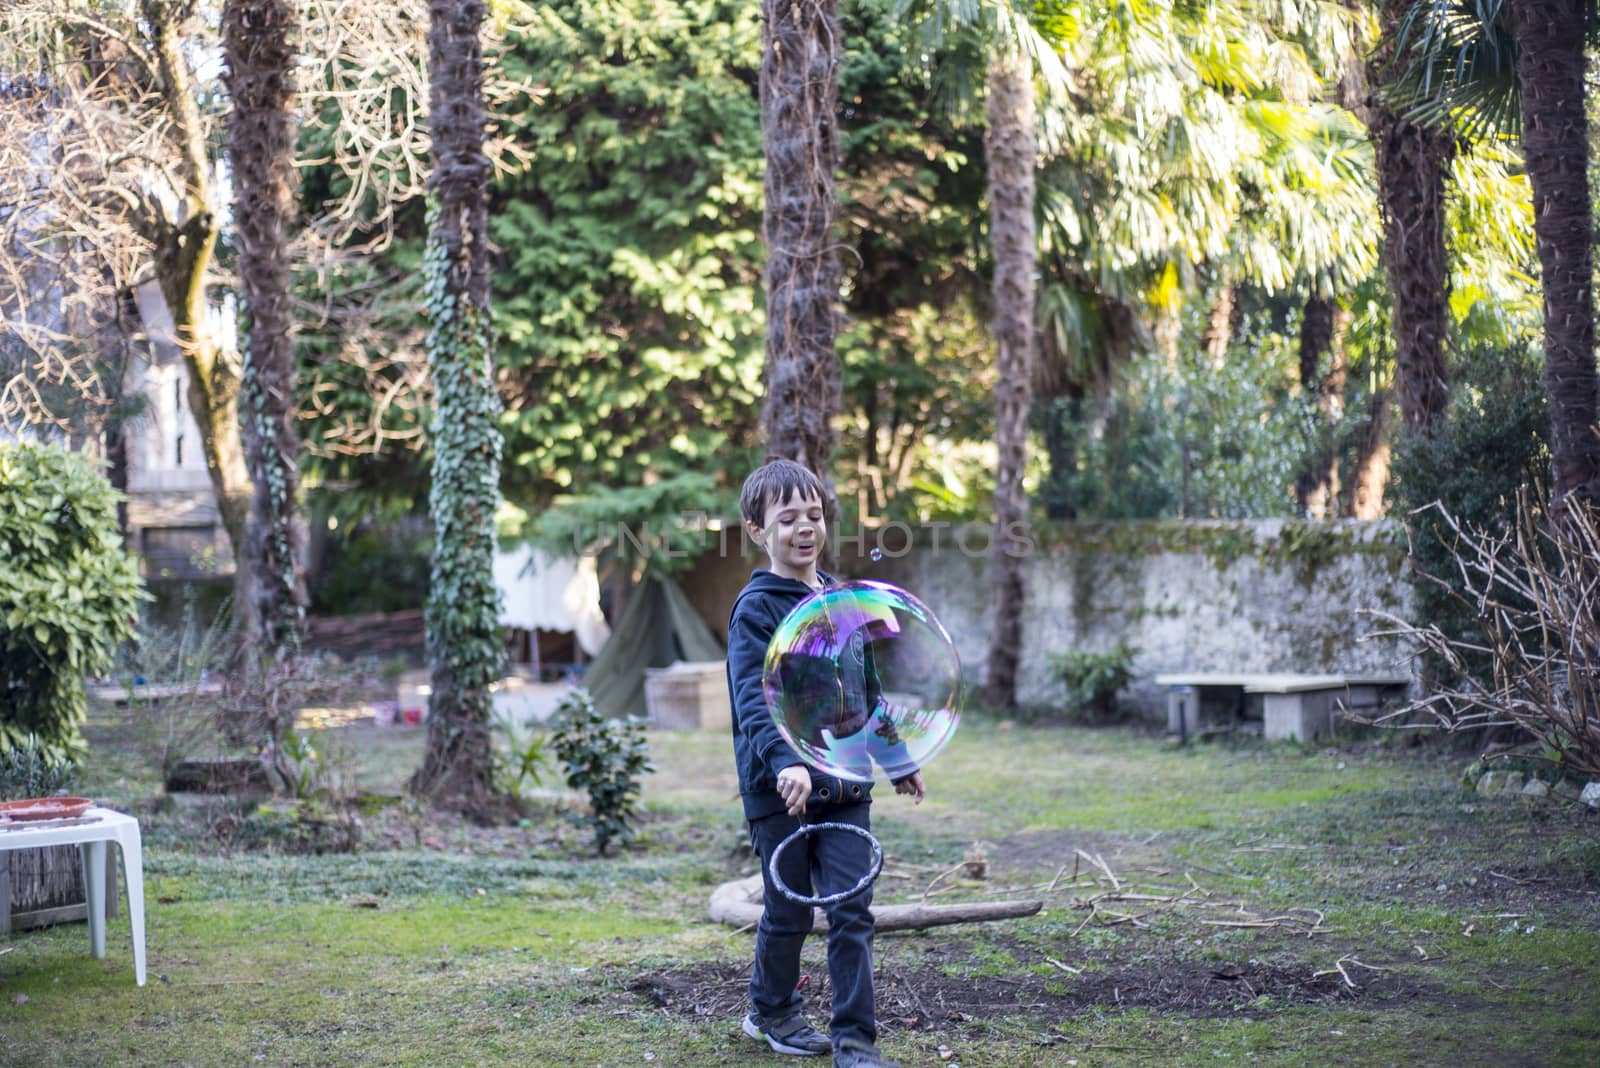 7-year-old child outdoors in the garden in winter makes big soap bubbles